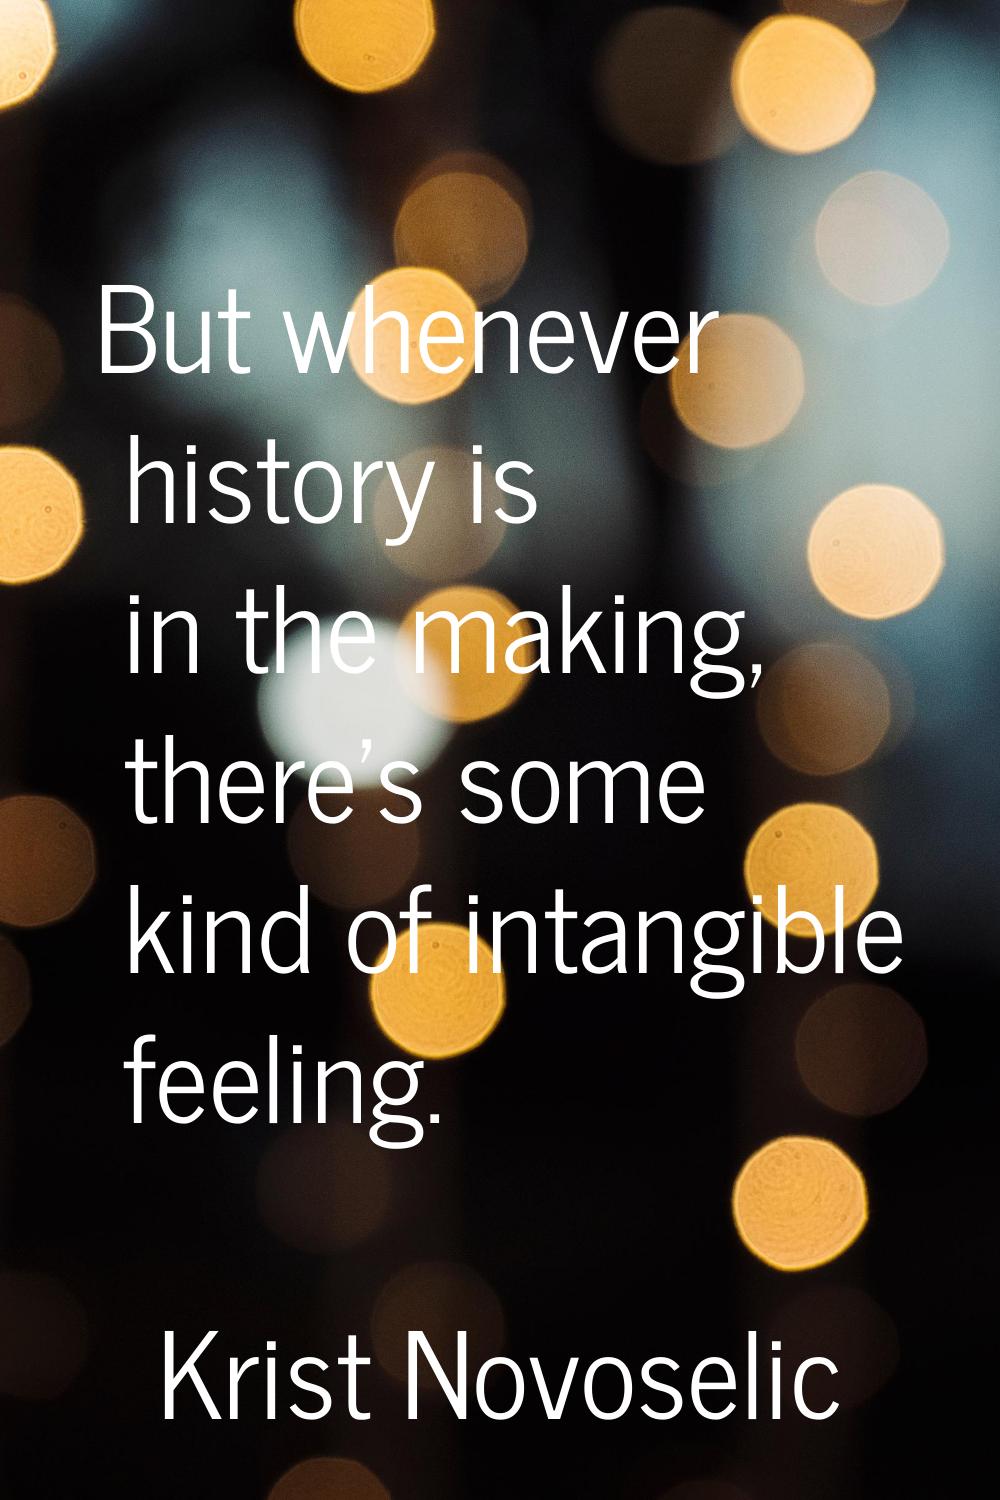 But whenever history is in the making, there's some kind of intangible feeling.